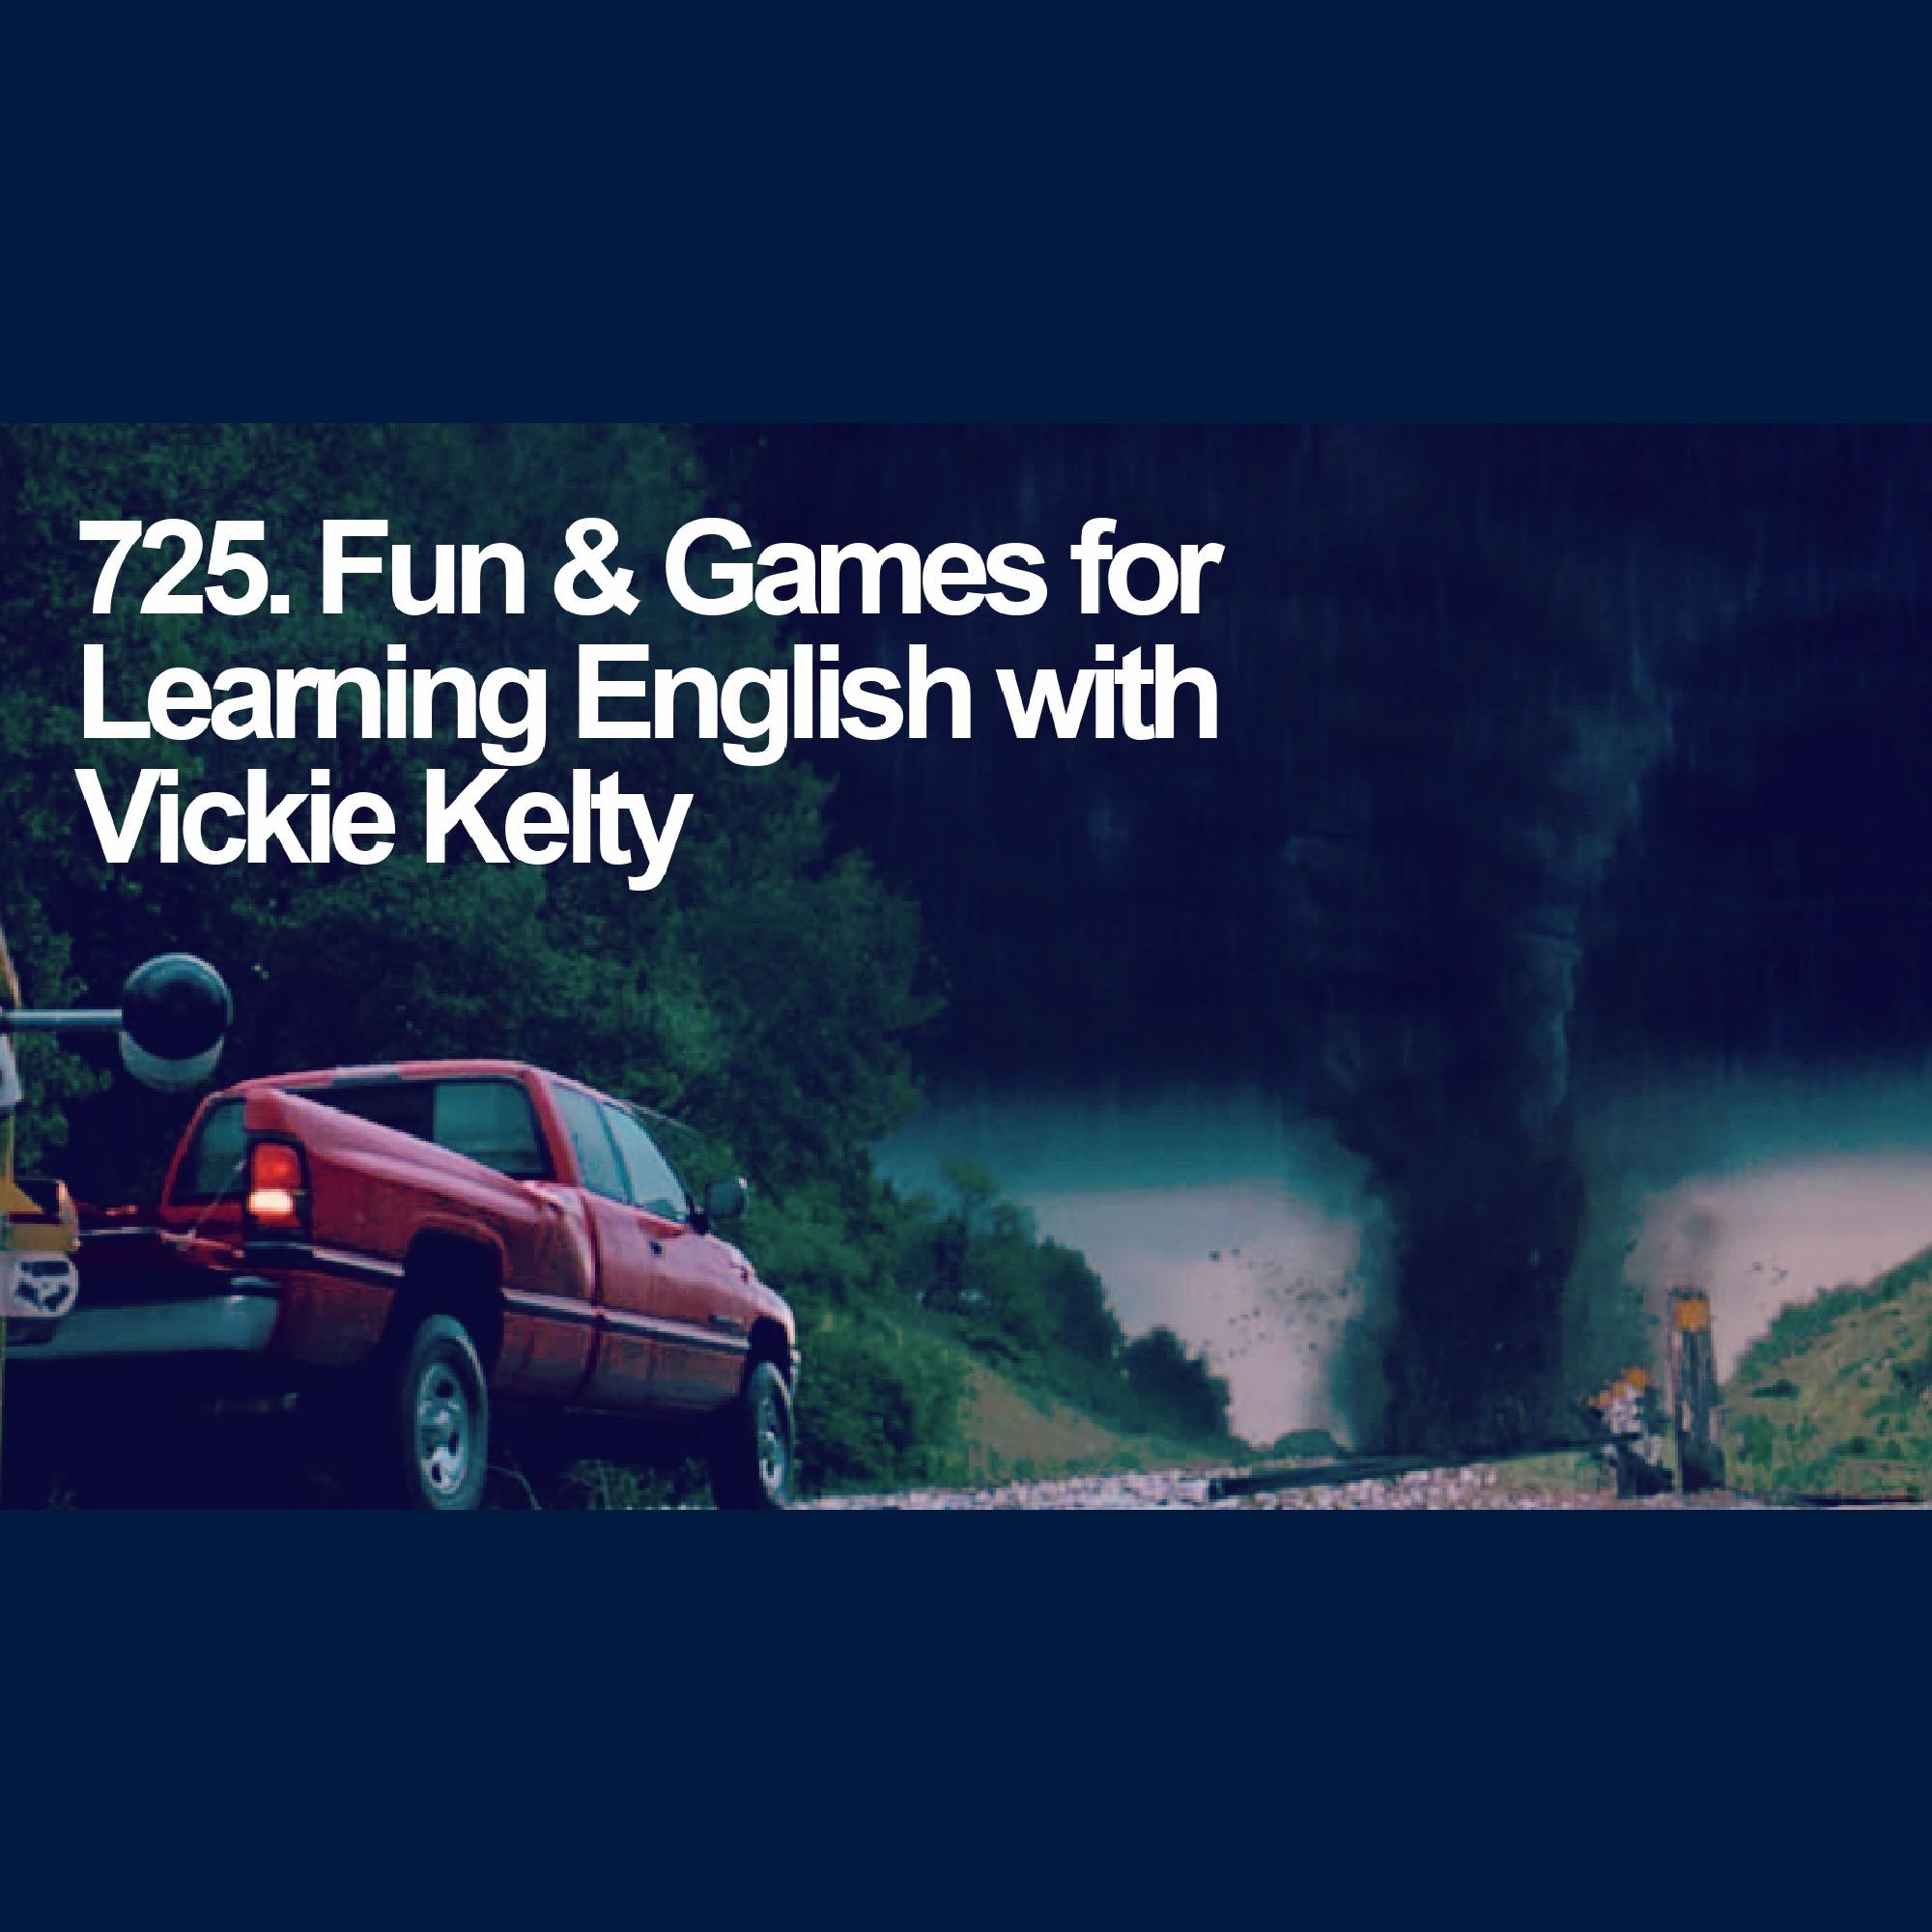 725. Fun & Games for Learning English with Vickie Kelty